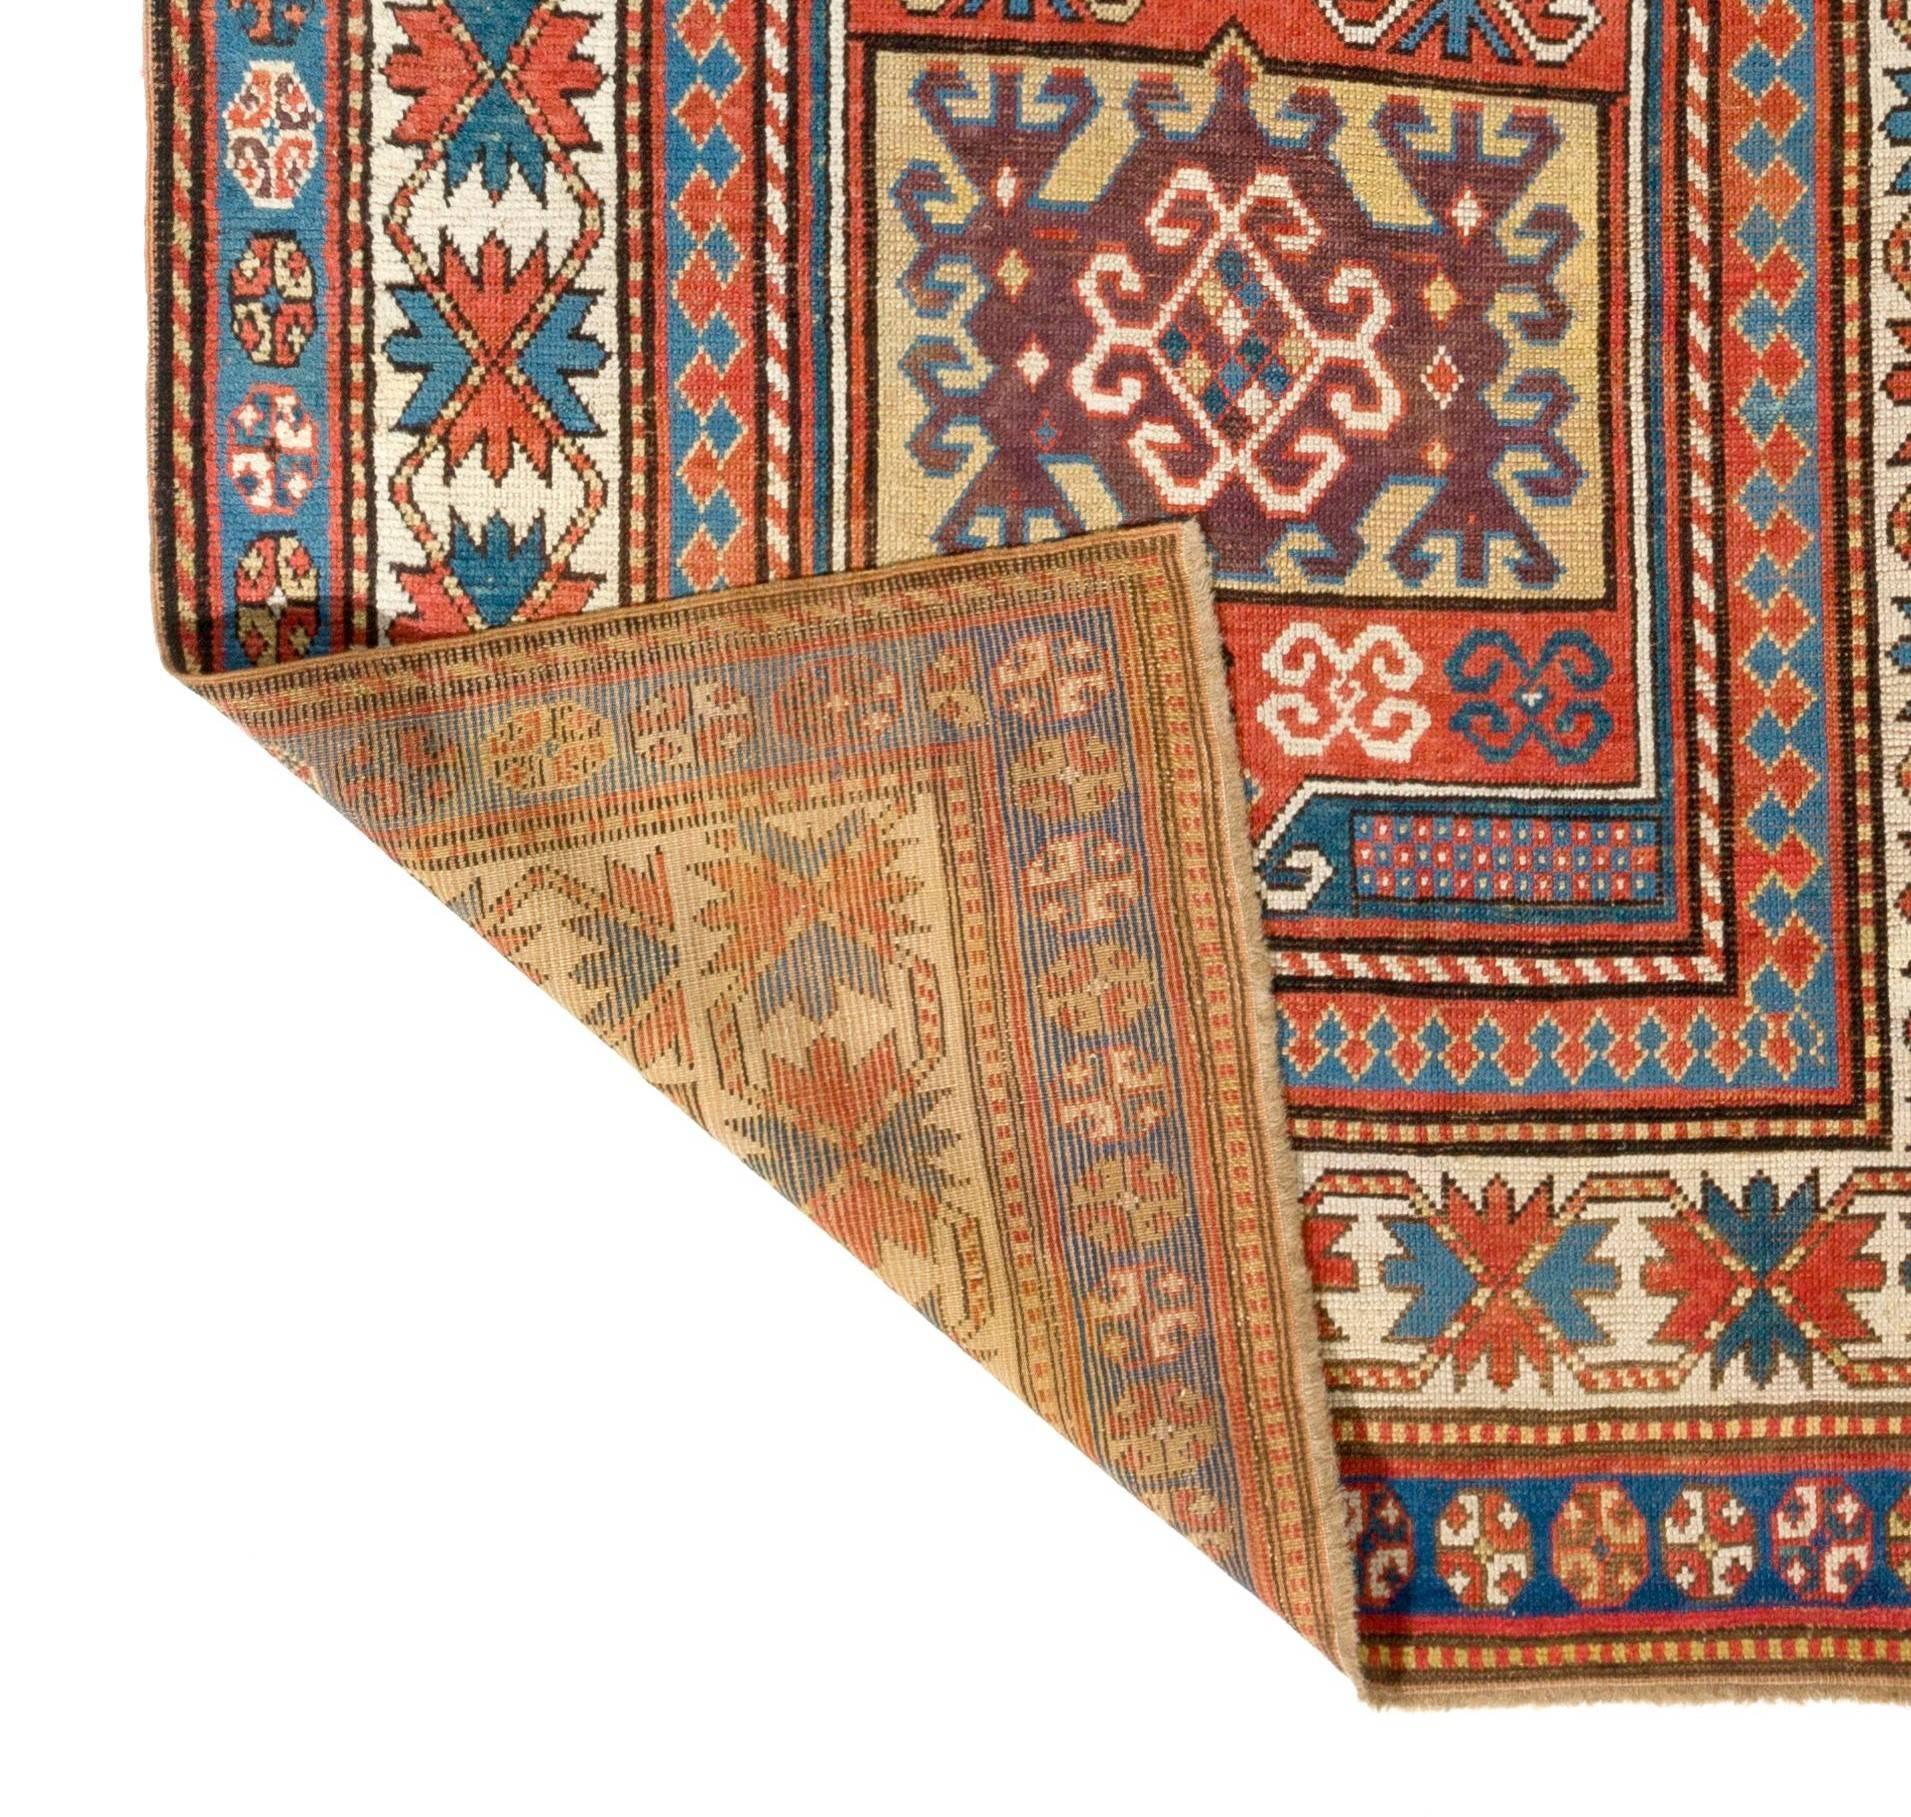 Antique Caucasian Kazak rug. Finely hand-knotted with even medium wool pile on wool foundation. Very good condition, no issues, washed professionally.  Measures: 4 x 8 ft.